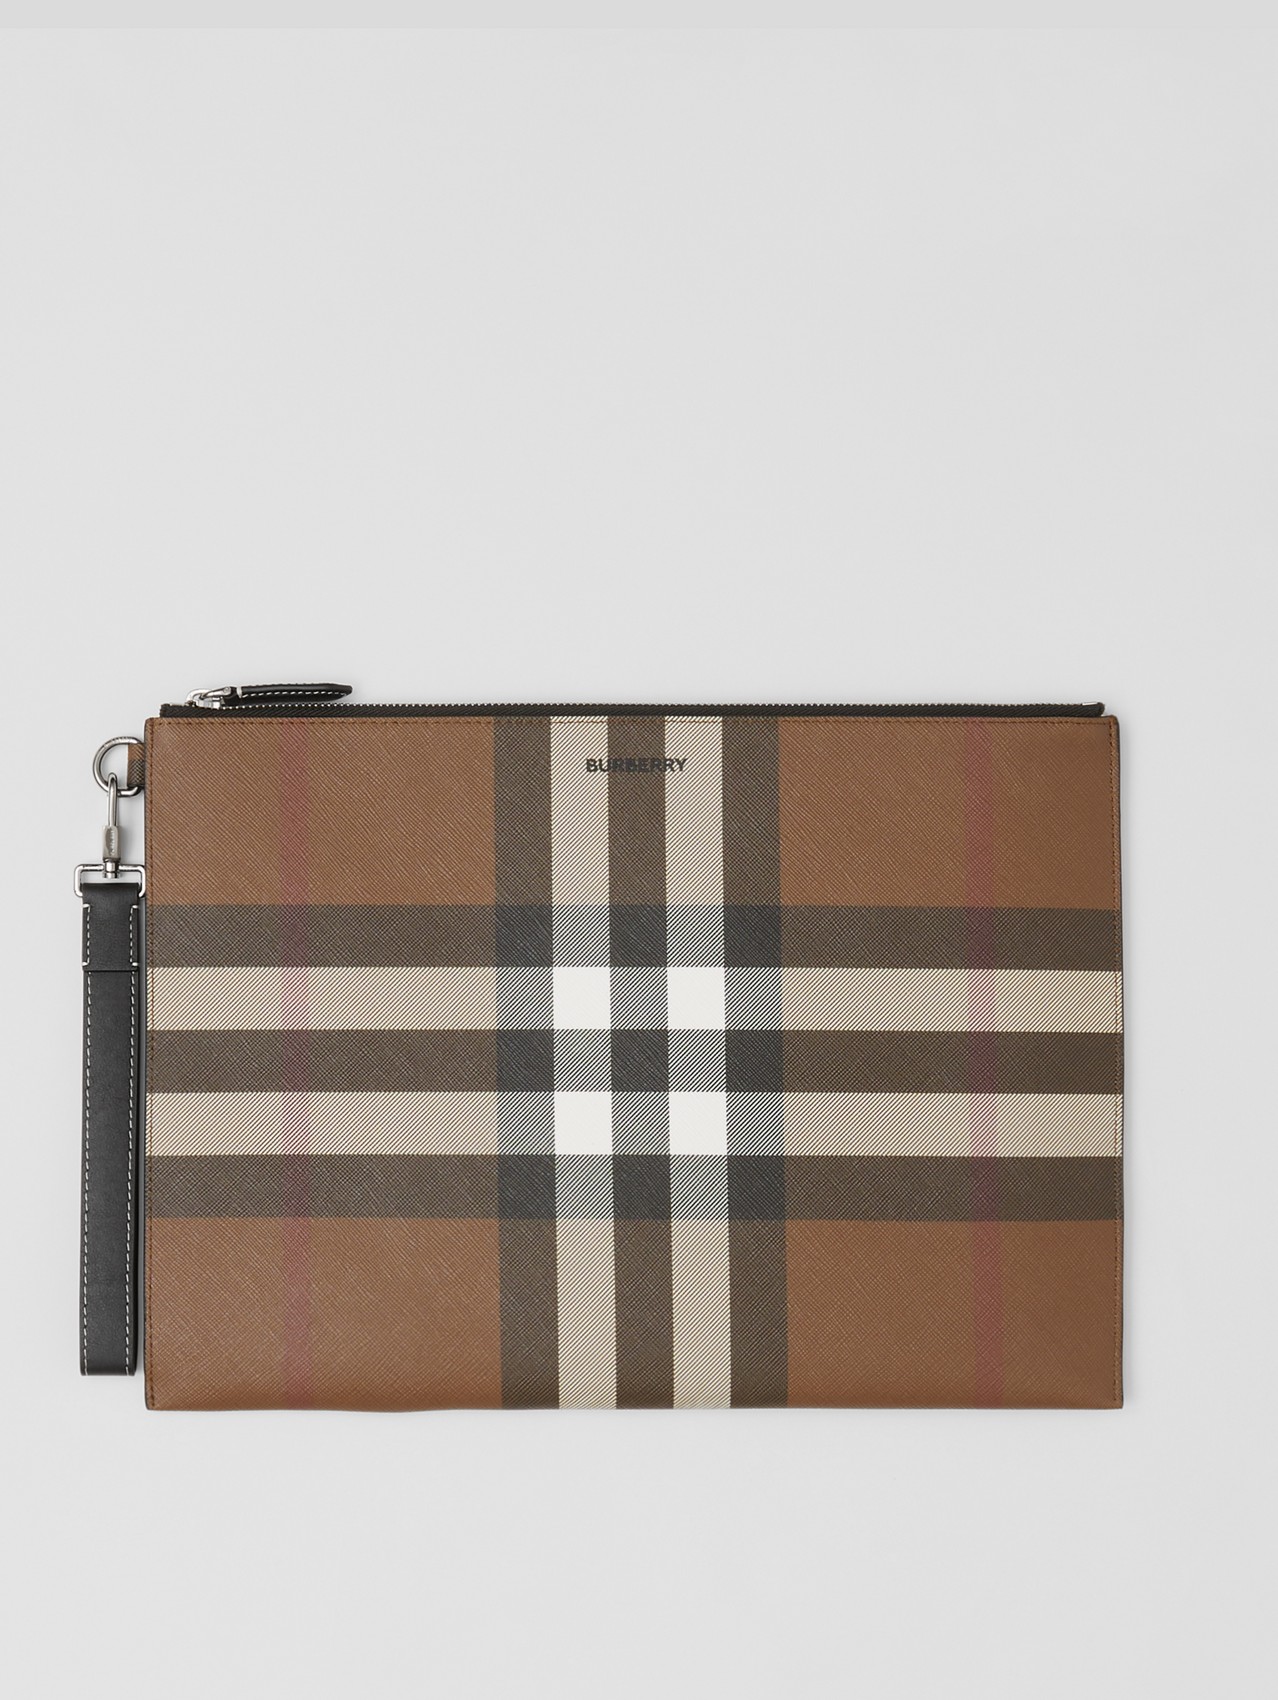 Men's Wallets | Men's Small Leather Goods | Burberry® Official